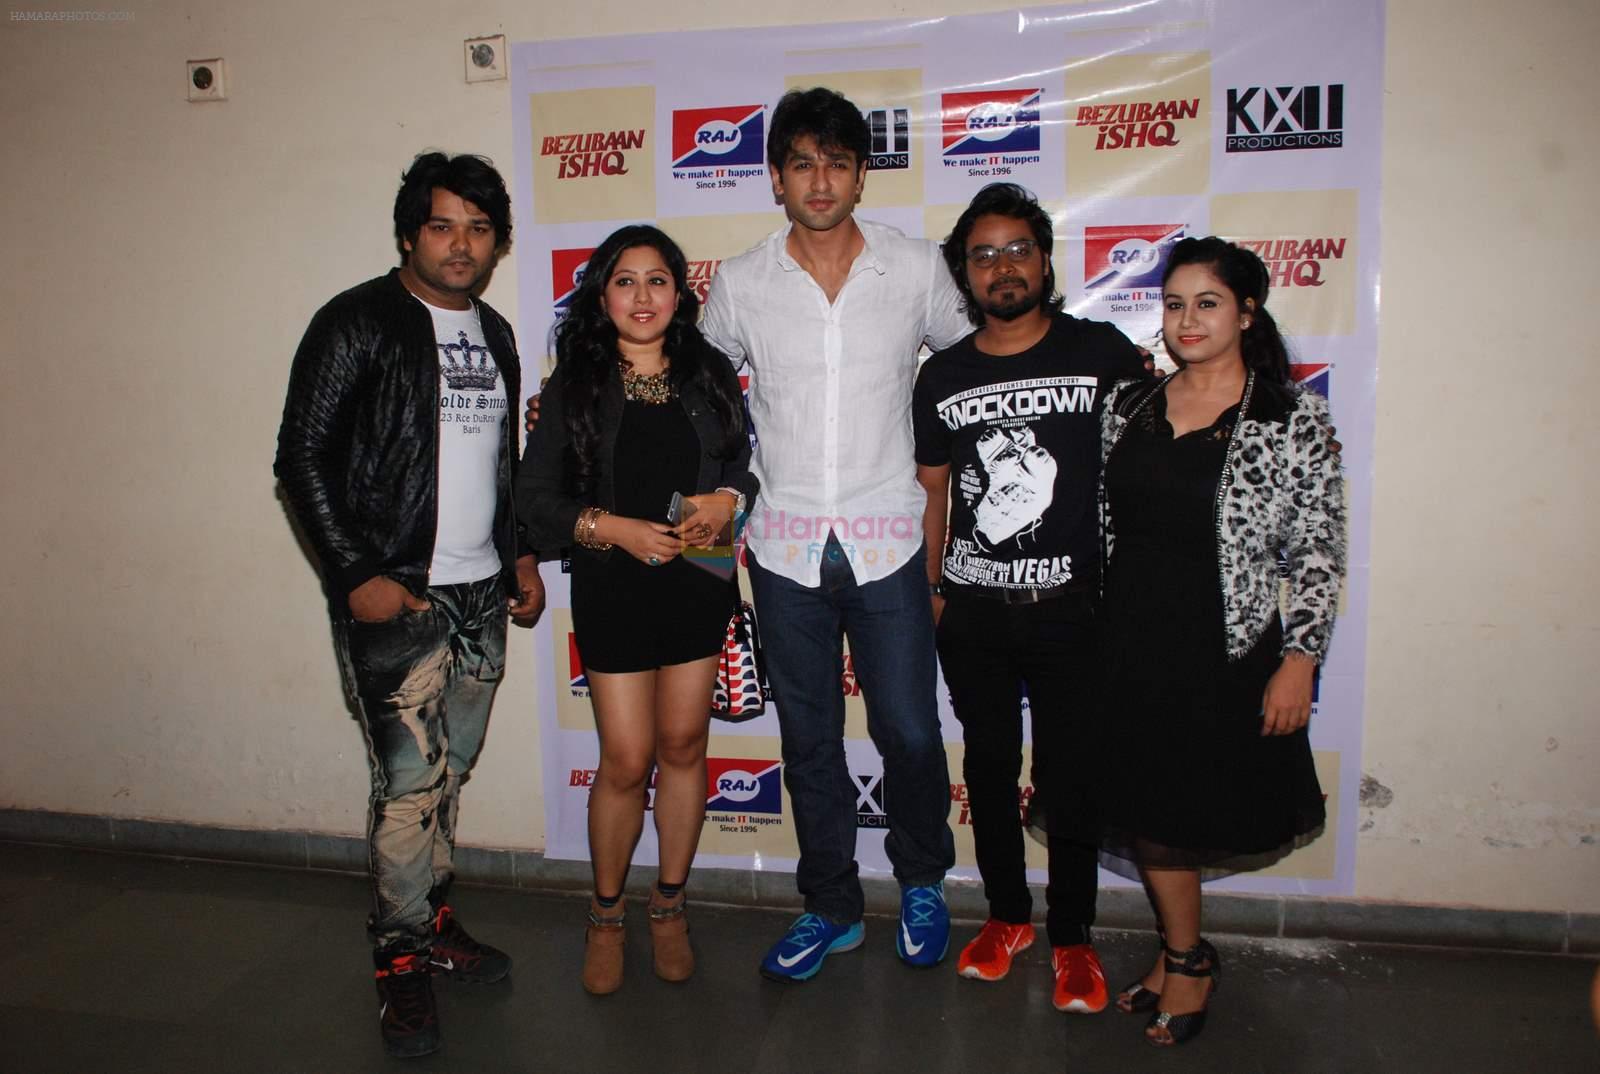 at Bezubaan Ishq team at Khandwala College for Promotion on 5th June 2015